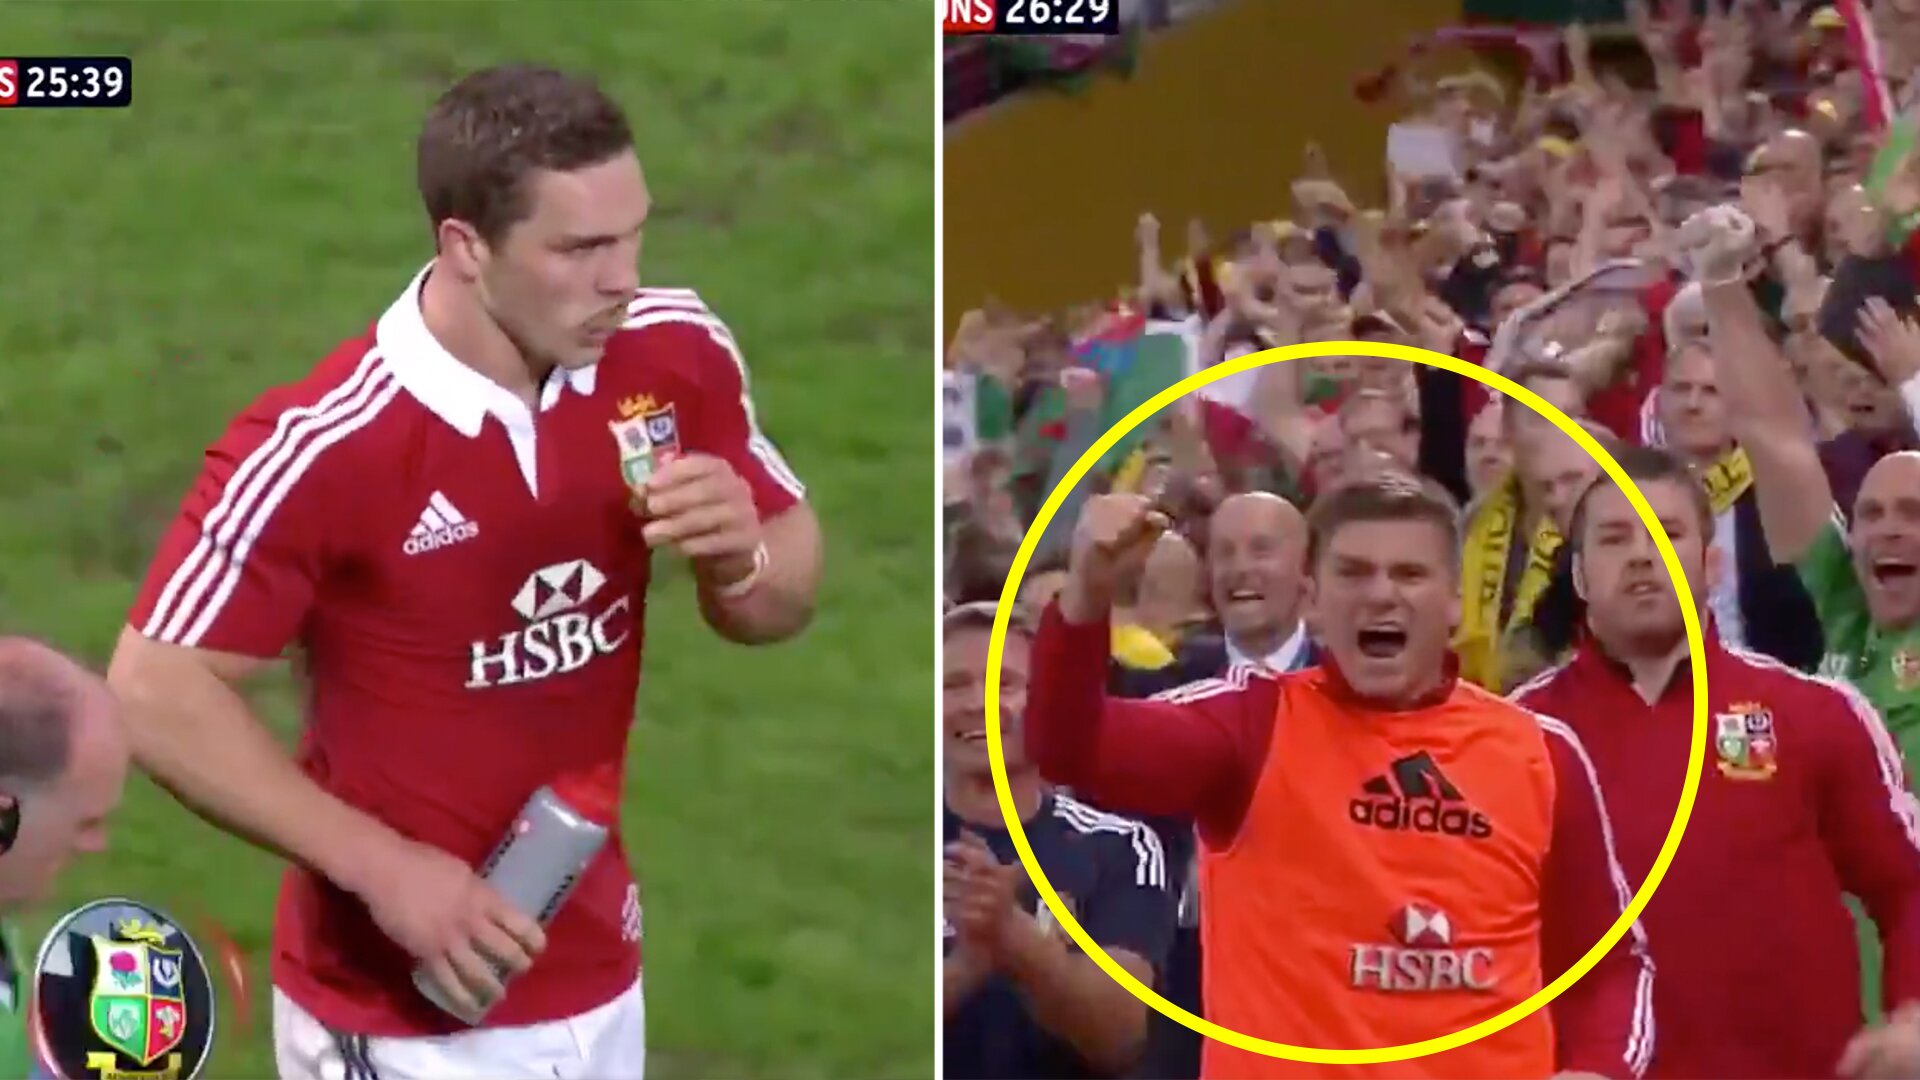 The Lions release full HD footage of one of the most outrageous moments in their history